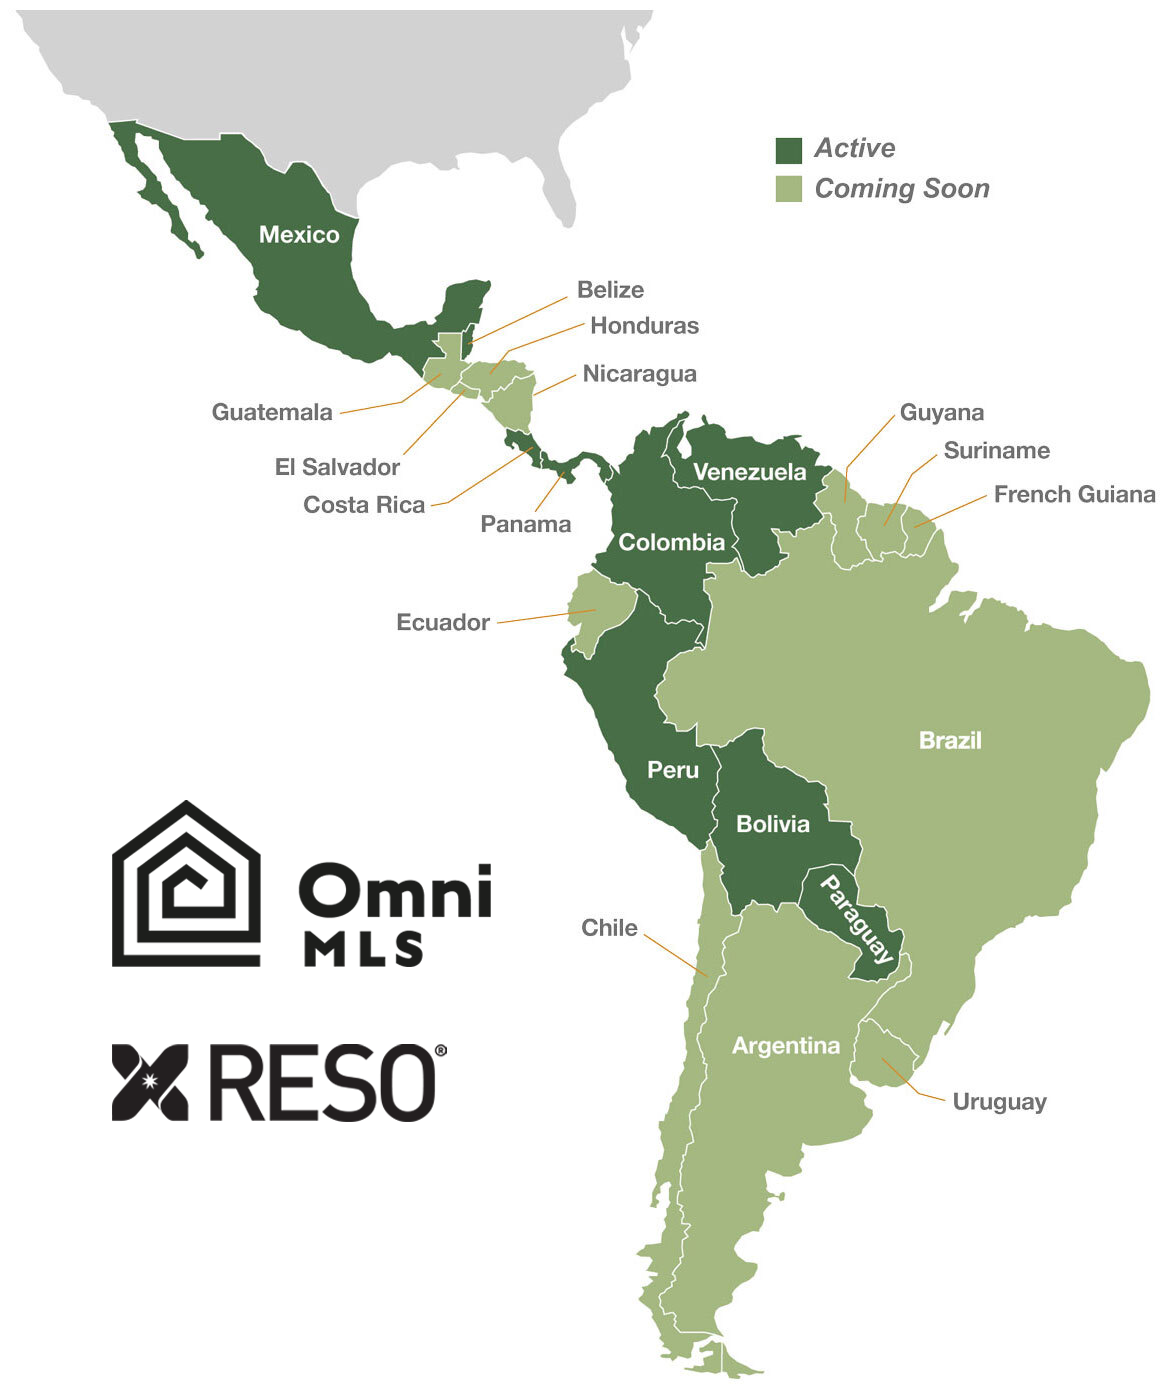 Omni MLS Brings RESO Standards to 9 Latin American Countries with 12 More on the Horizon